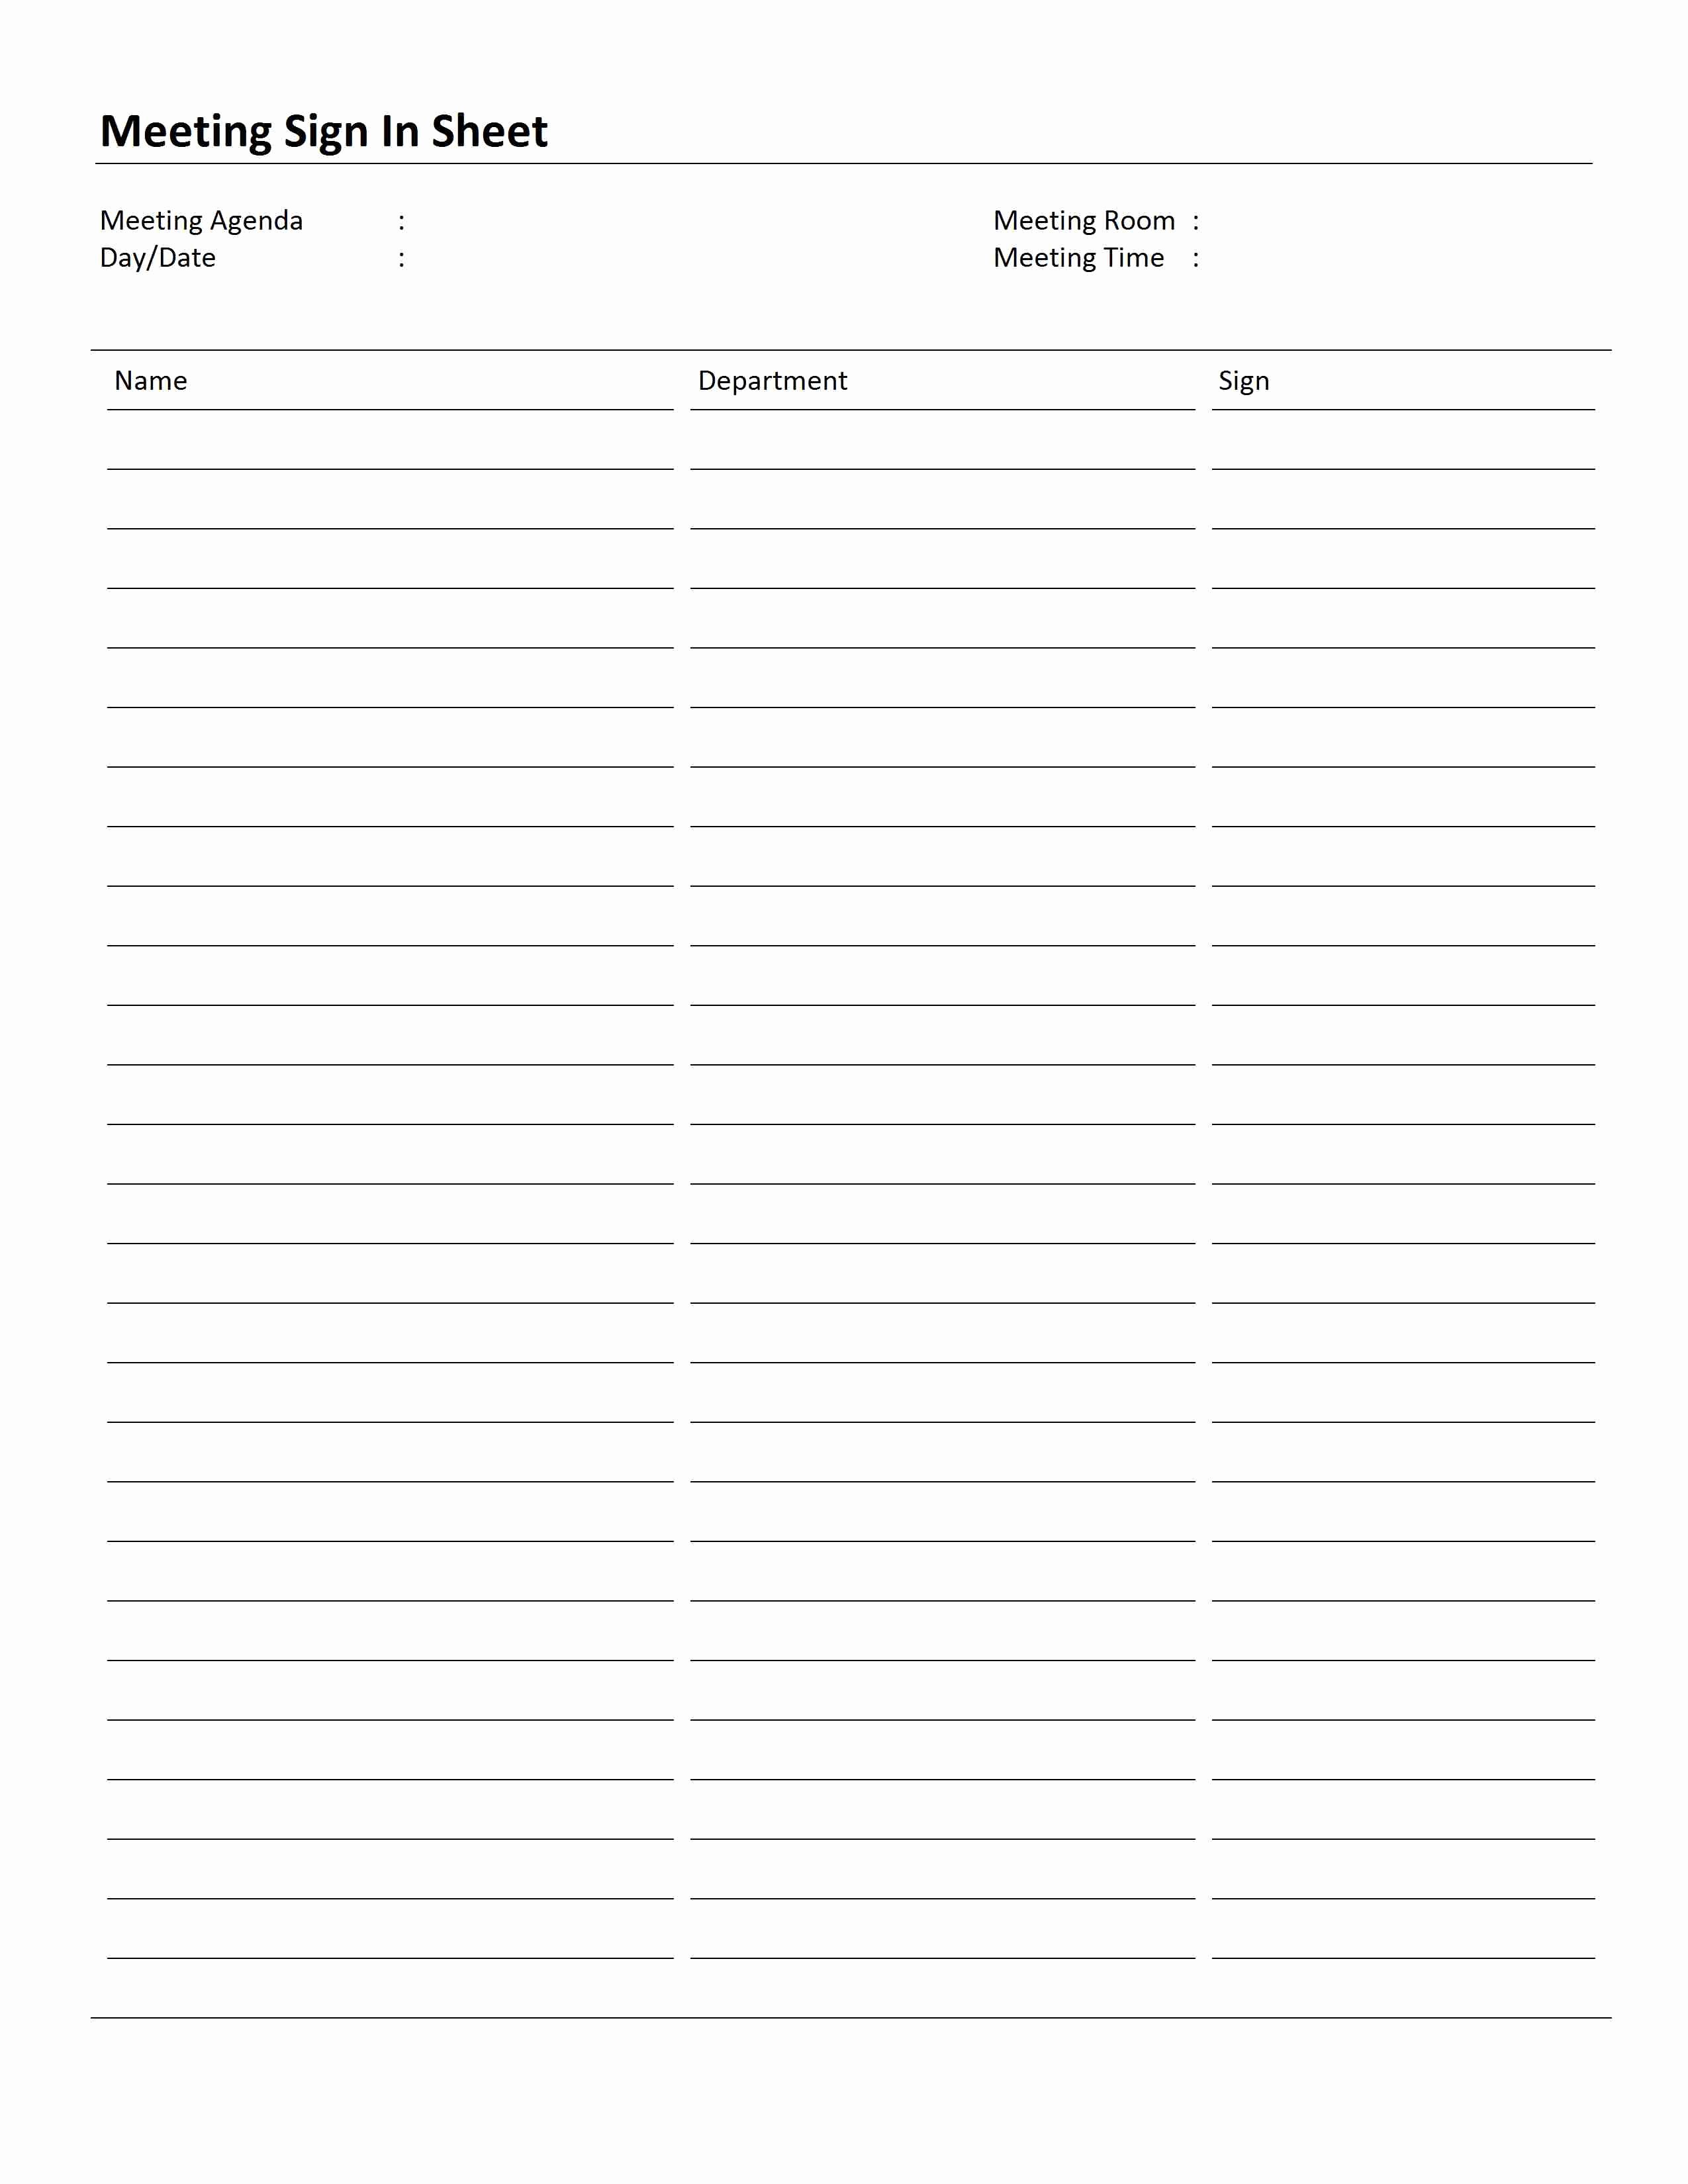 Microsoft Templates Sign In Sheet Unique Meeting Sign In Sheet